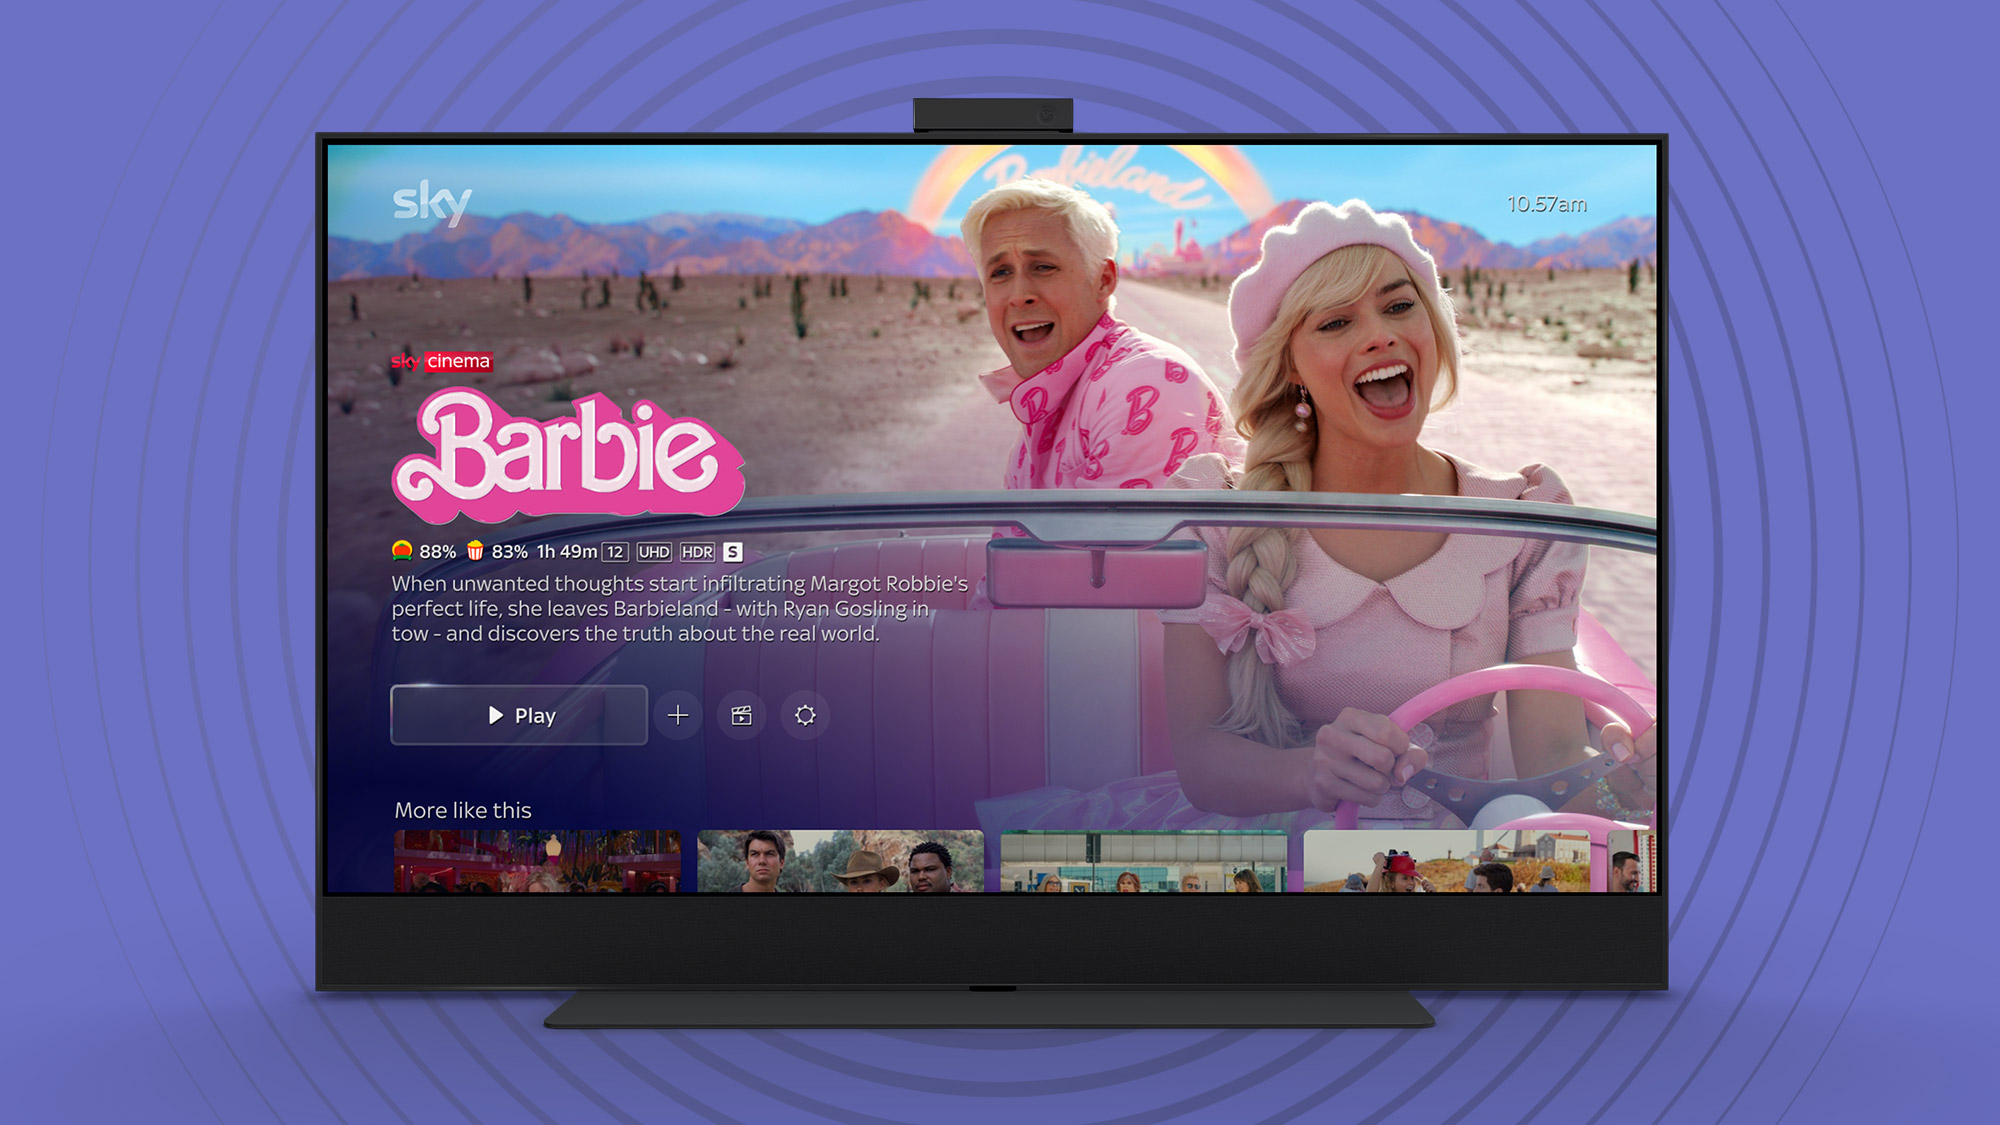 A Sky TV with Barbie displayed on it